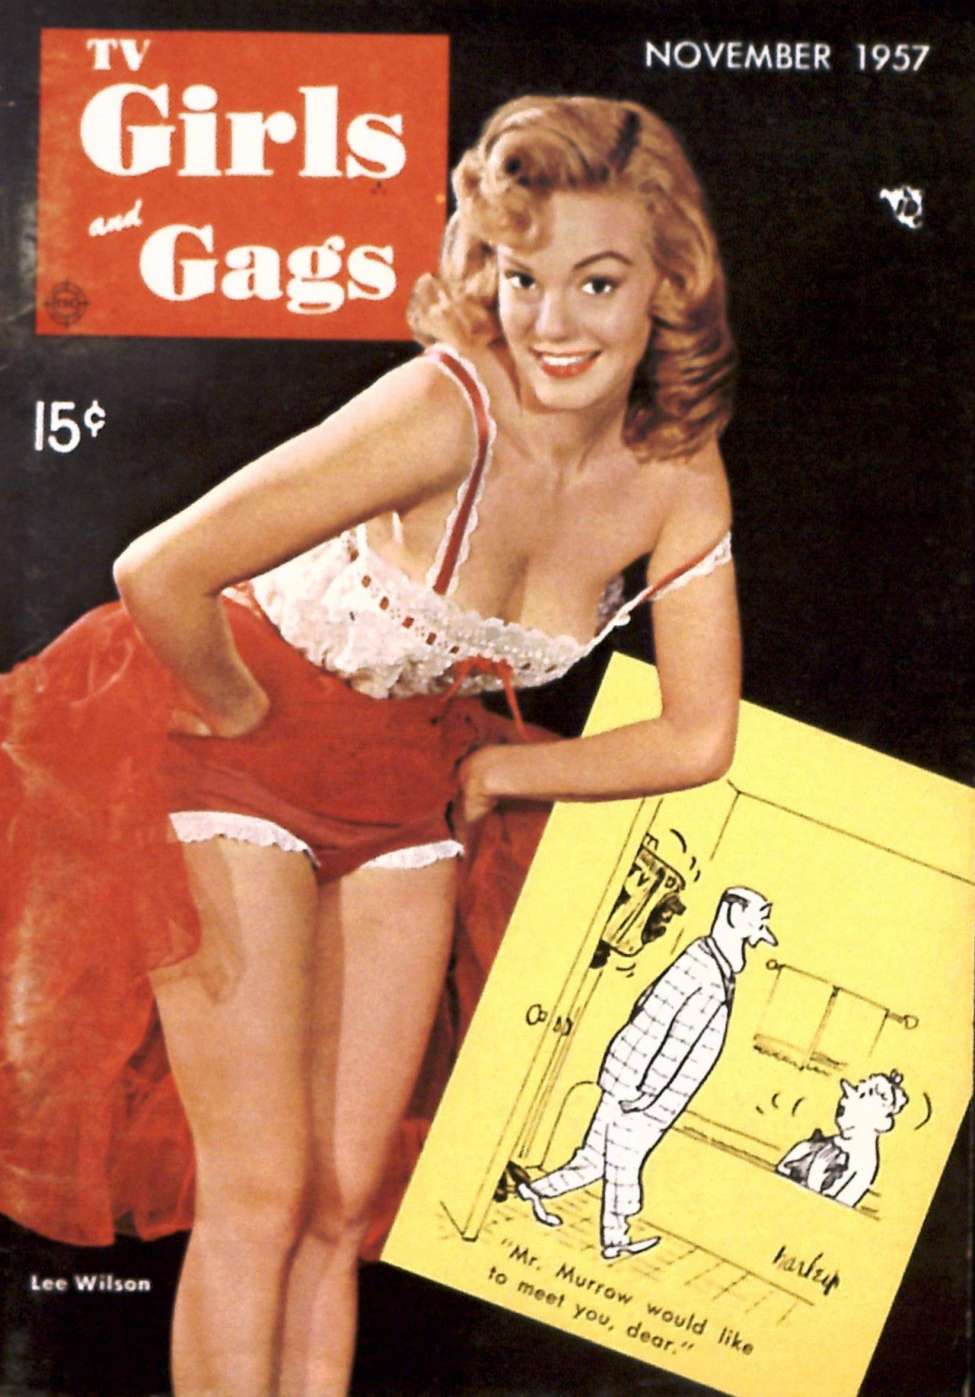 Book Cover For TV Girls and Gags v4 6